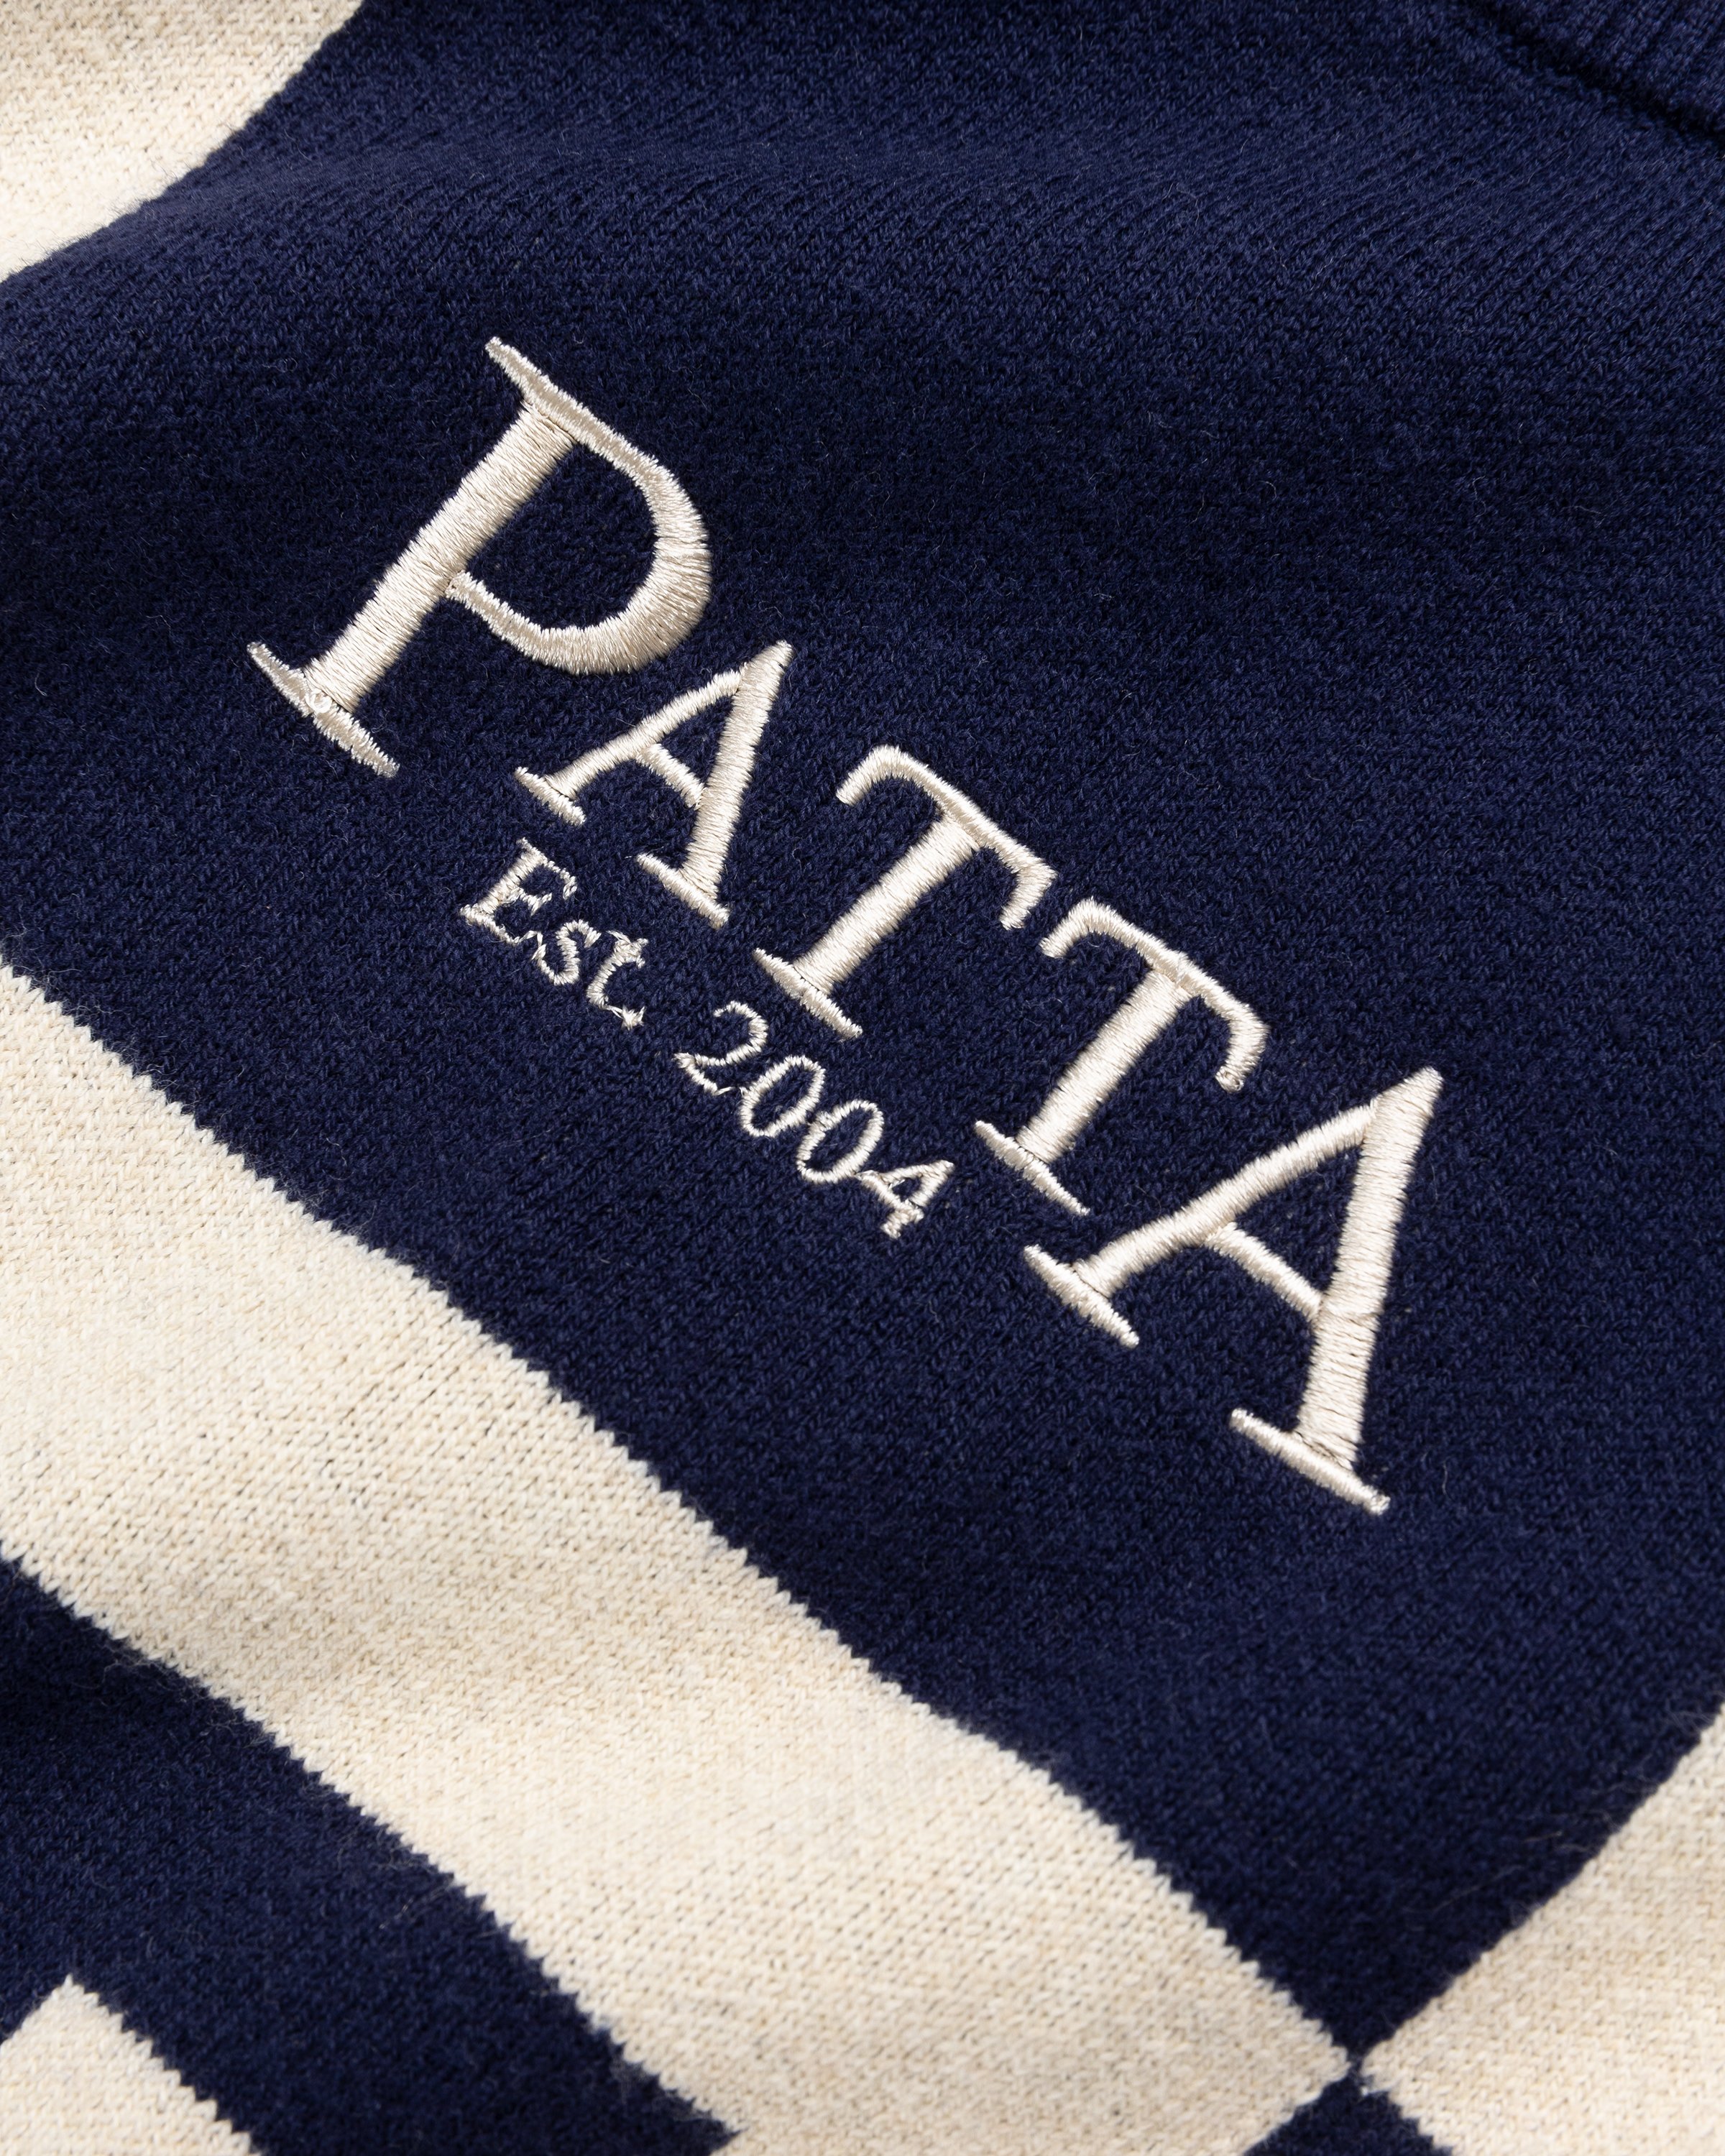 Patta - Alphabet Knitted Sweater Evening Blue/Pale Khaki - Clothing - Green - Image 4